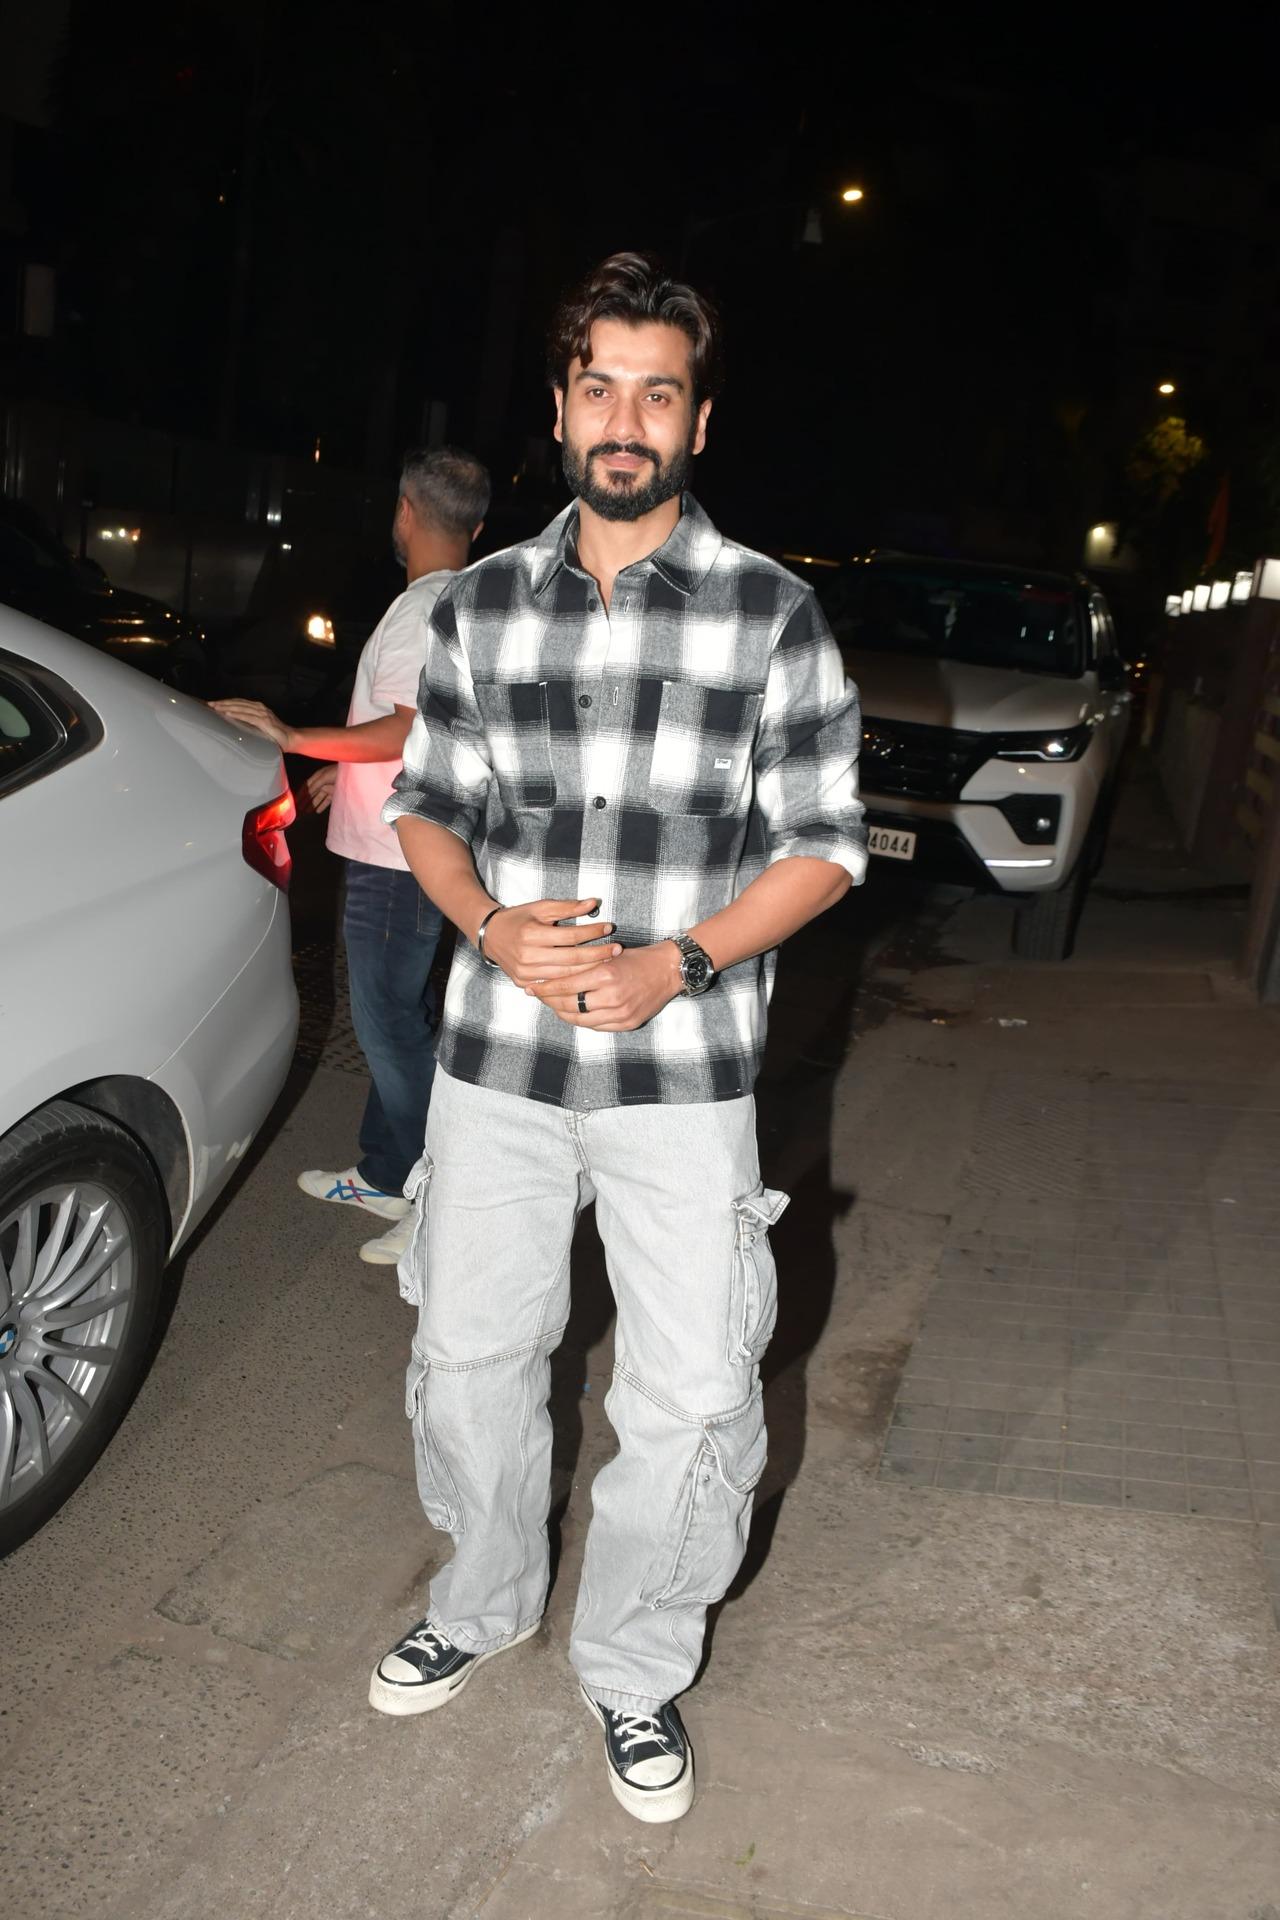 Actor Sunny Kaushal kept it casual in cargo pants and checkered shirt